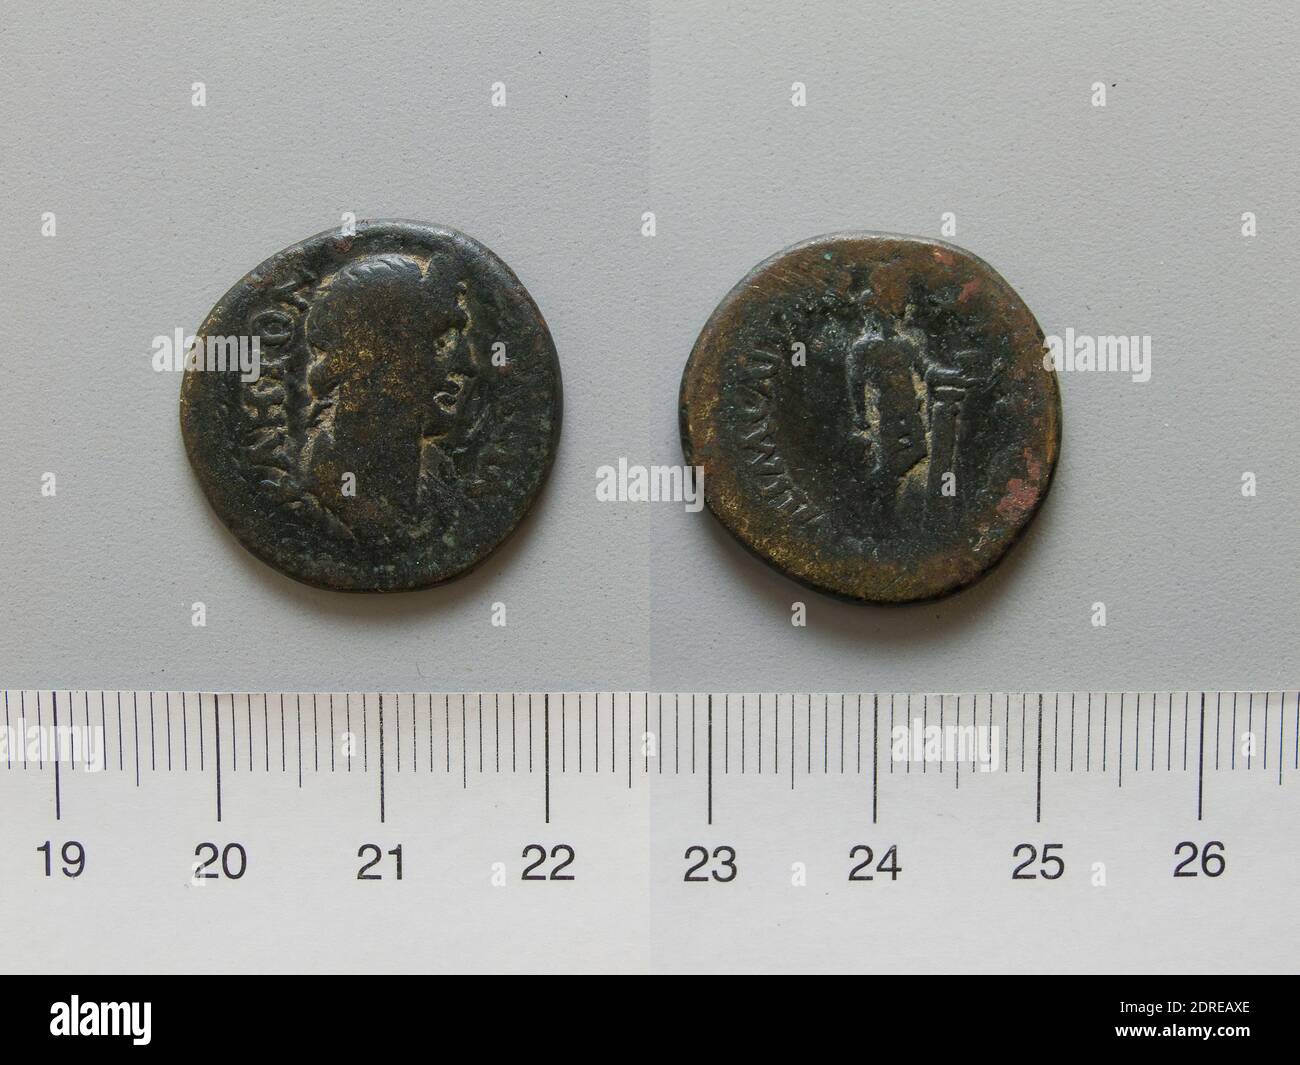 Ruler: Trajan, Emperor of Rome, A.D. 53–117, ruled 98–117, Mint: Sala, Coin of Trajan, Emperor of Rome from Sala, A.D. 98–117, Copper, 5.82 g, 7:00, 23.5 mm, Made in Sala, Greek, 1st–2nd century A.D., Numismatics Stock Photo